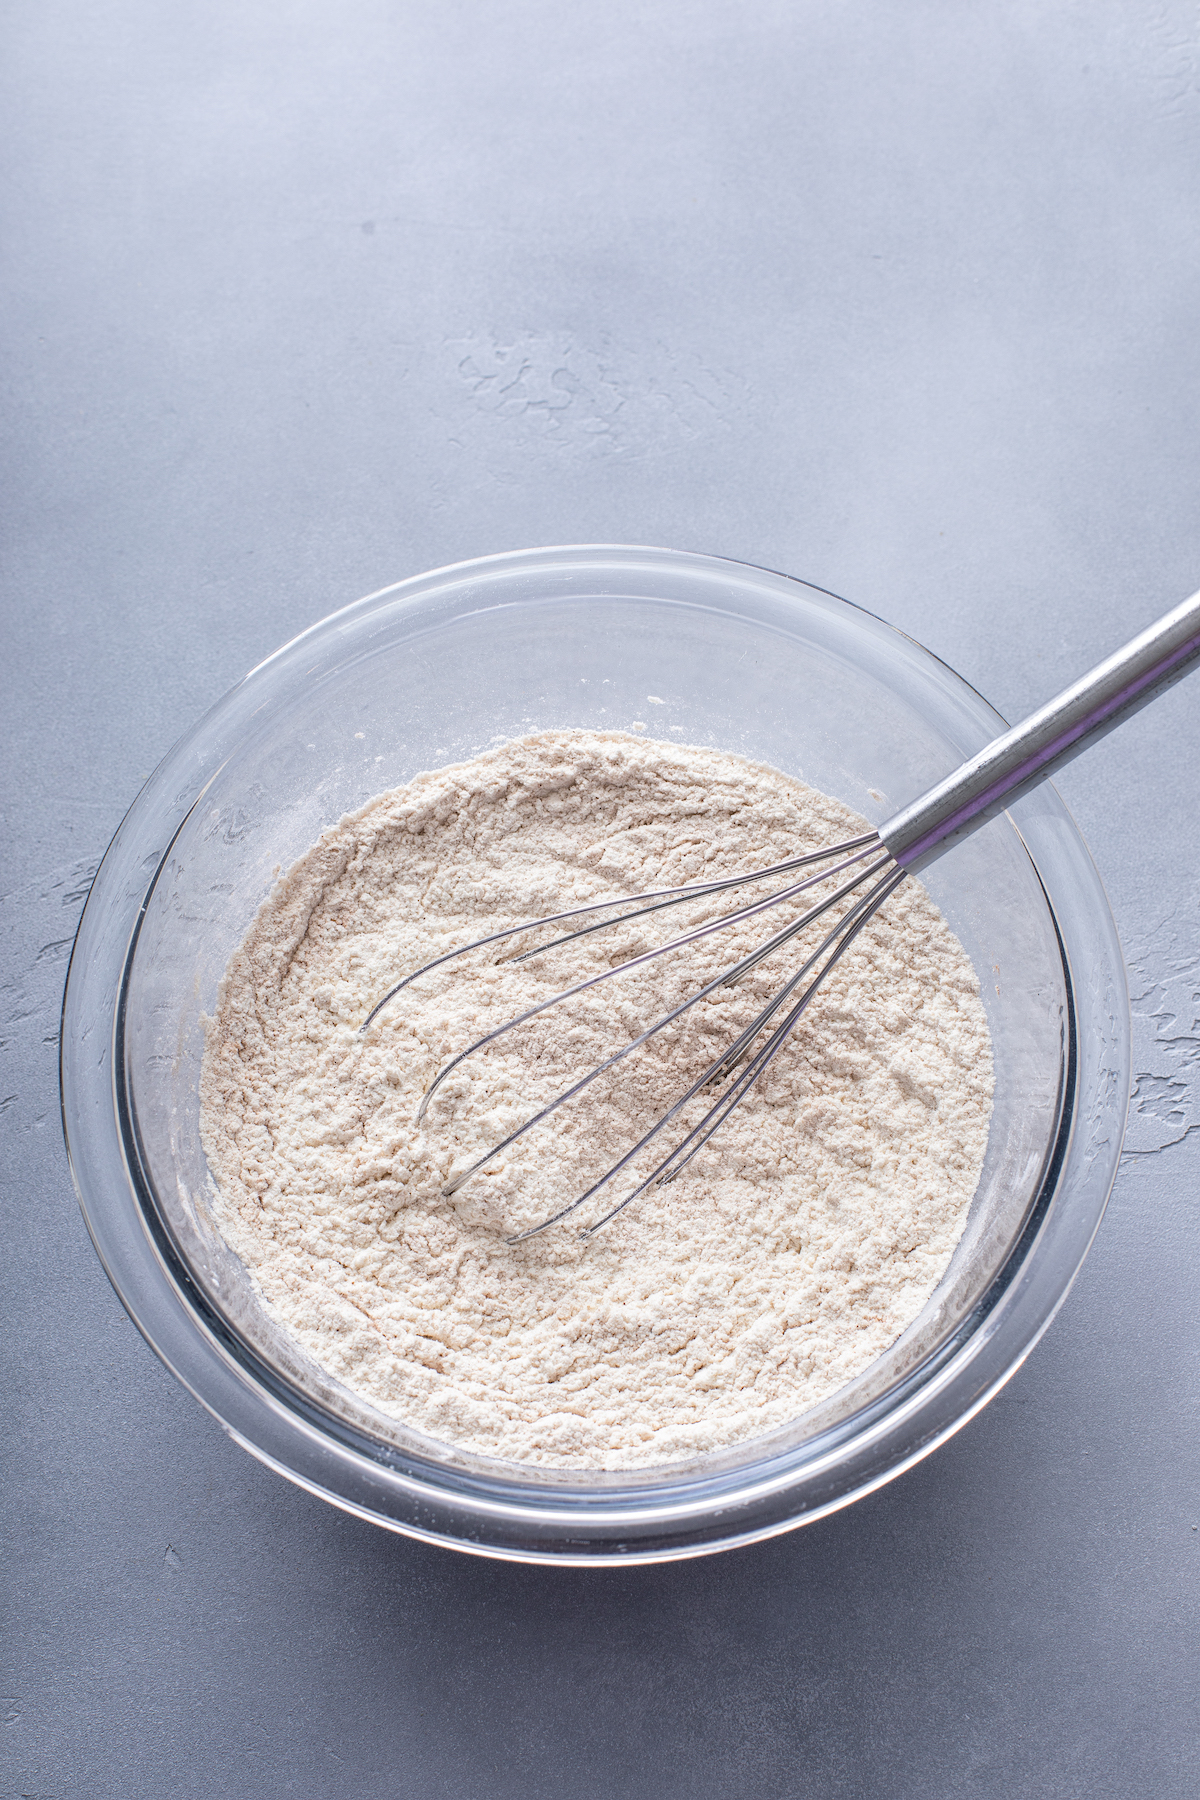 Dry baking ingredients in a glass bowl with a whisk.